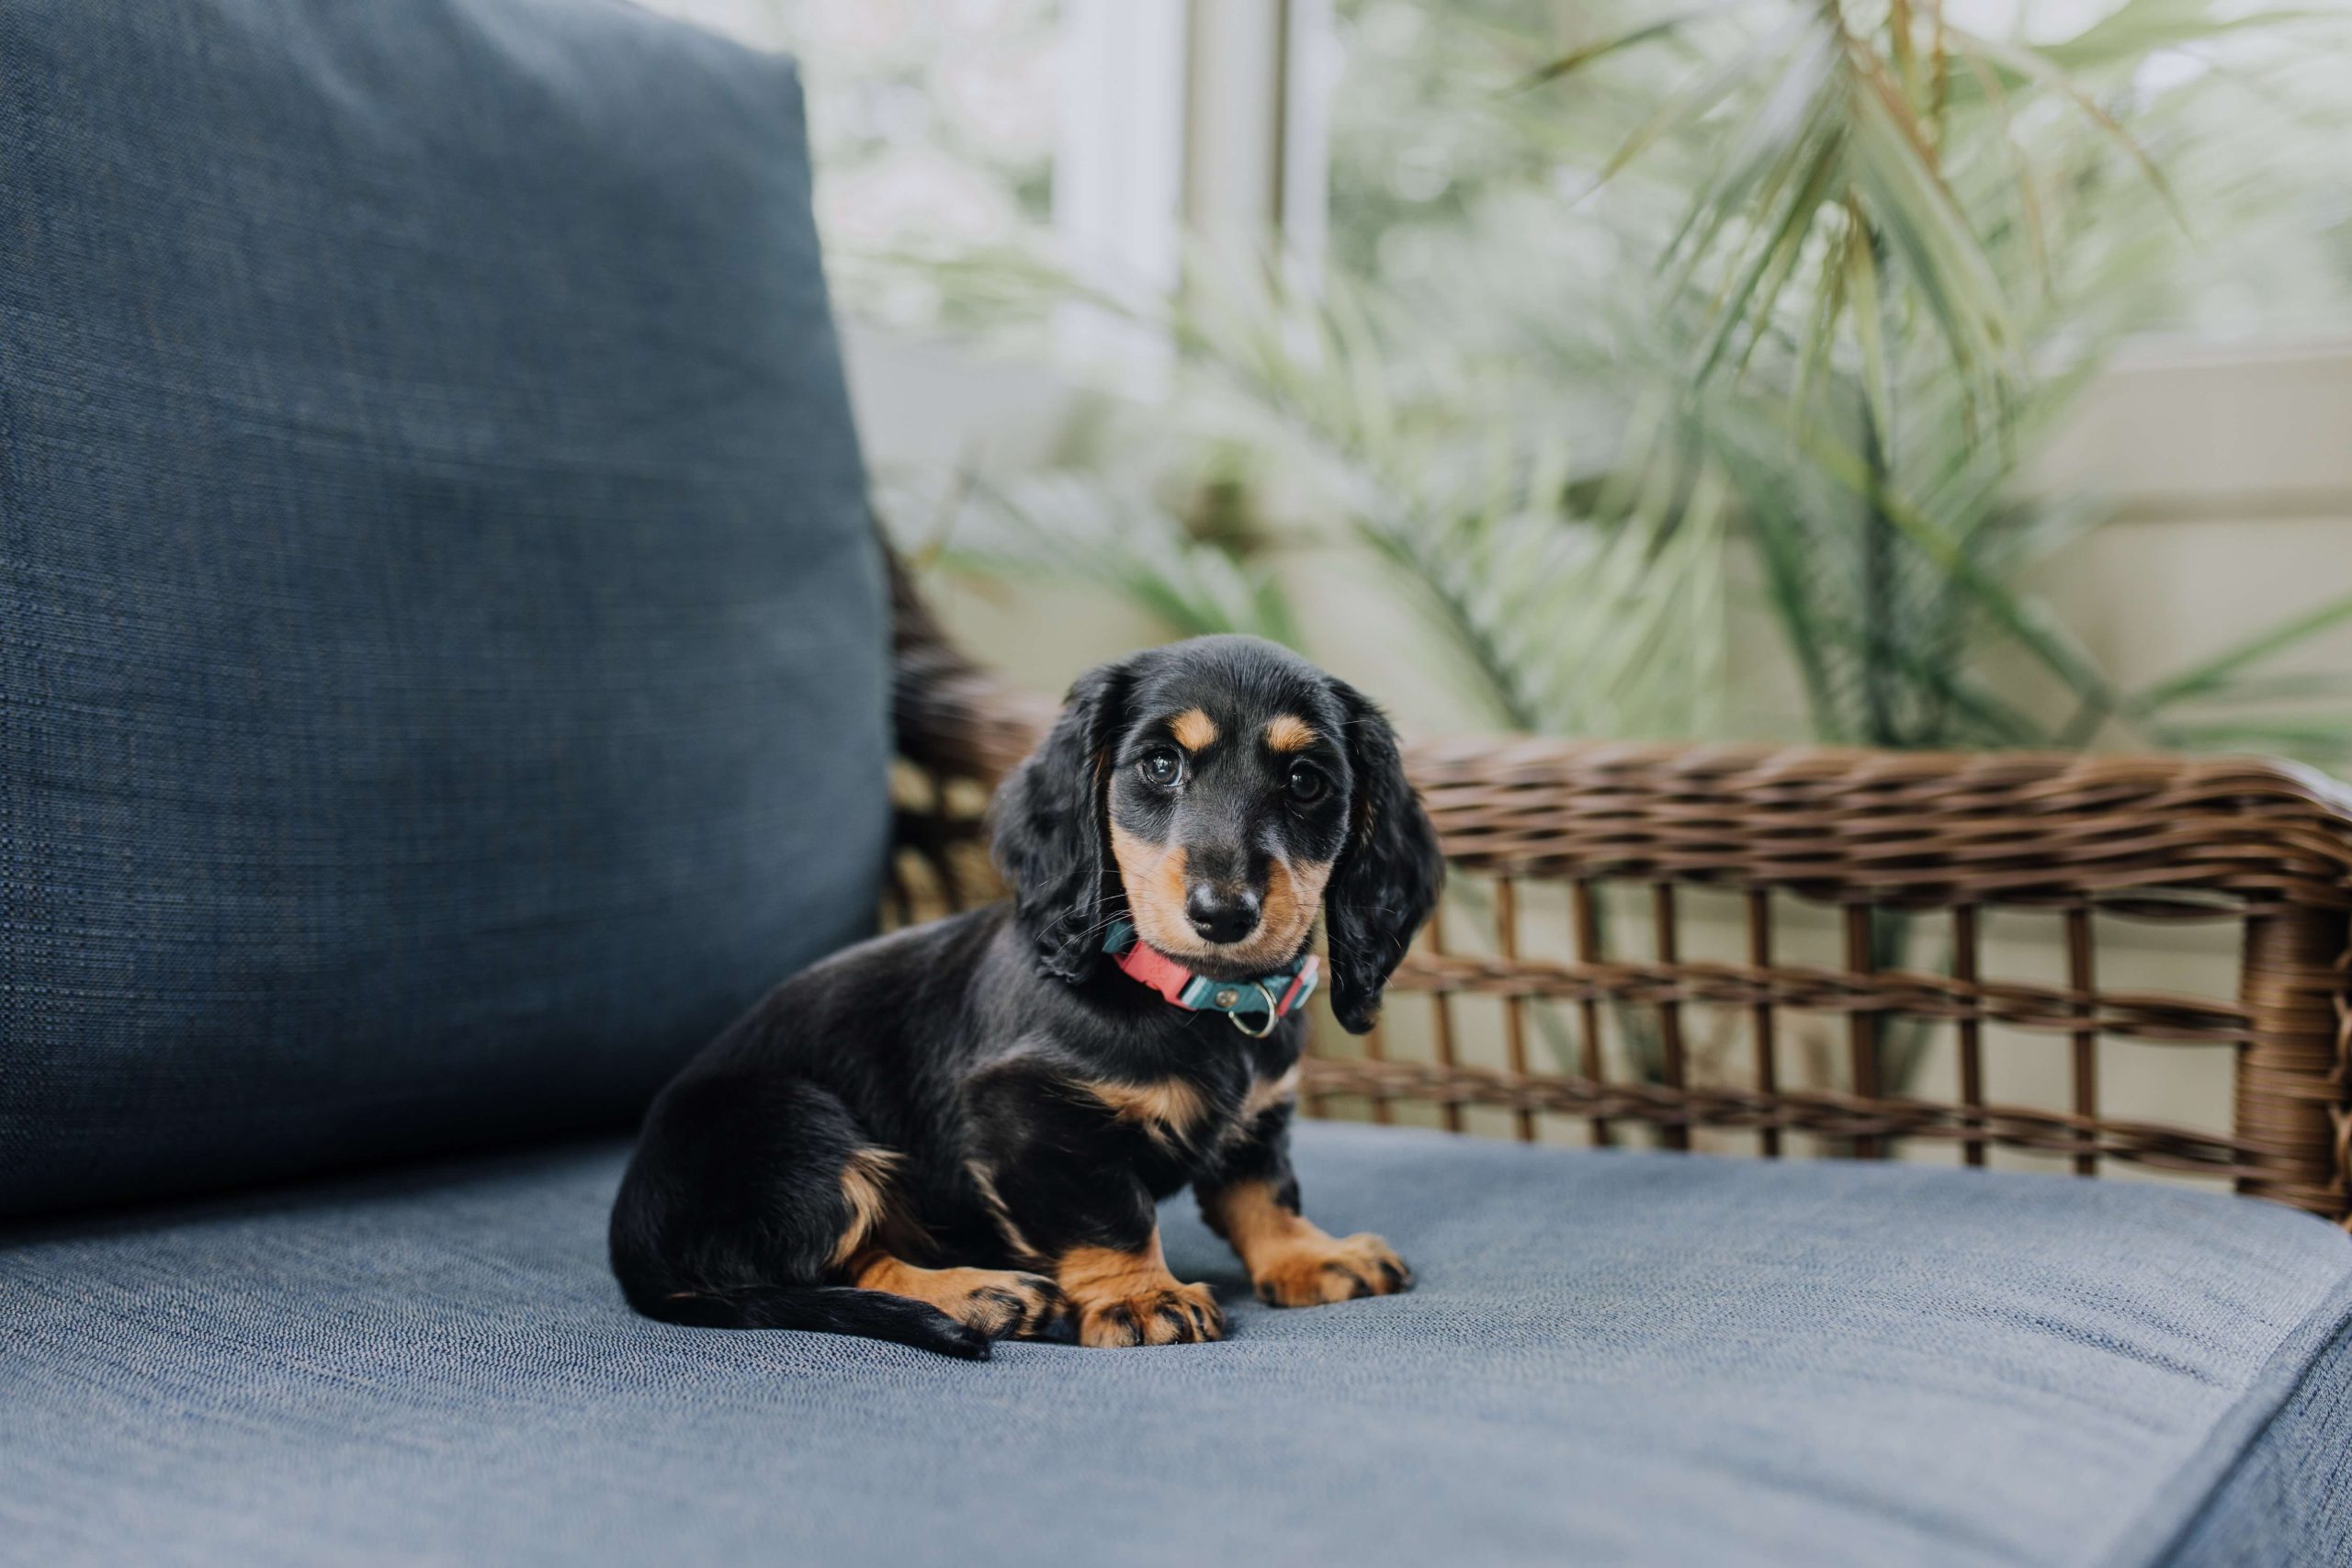 Why is my Dachshund puppy not gaining weight?